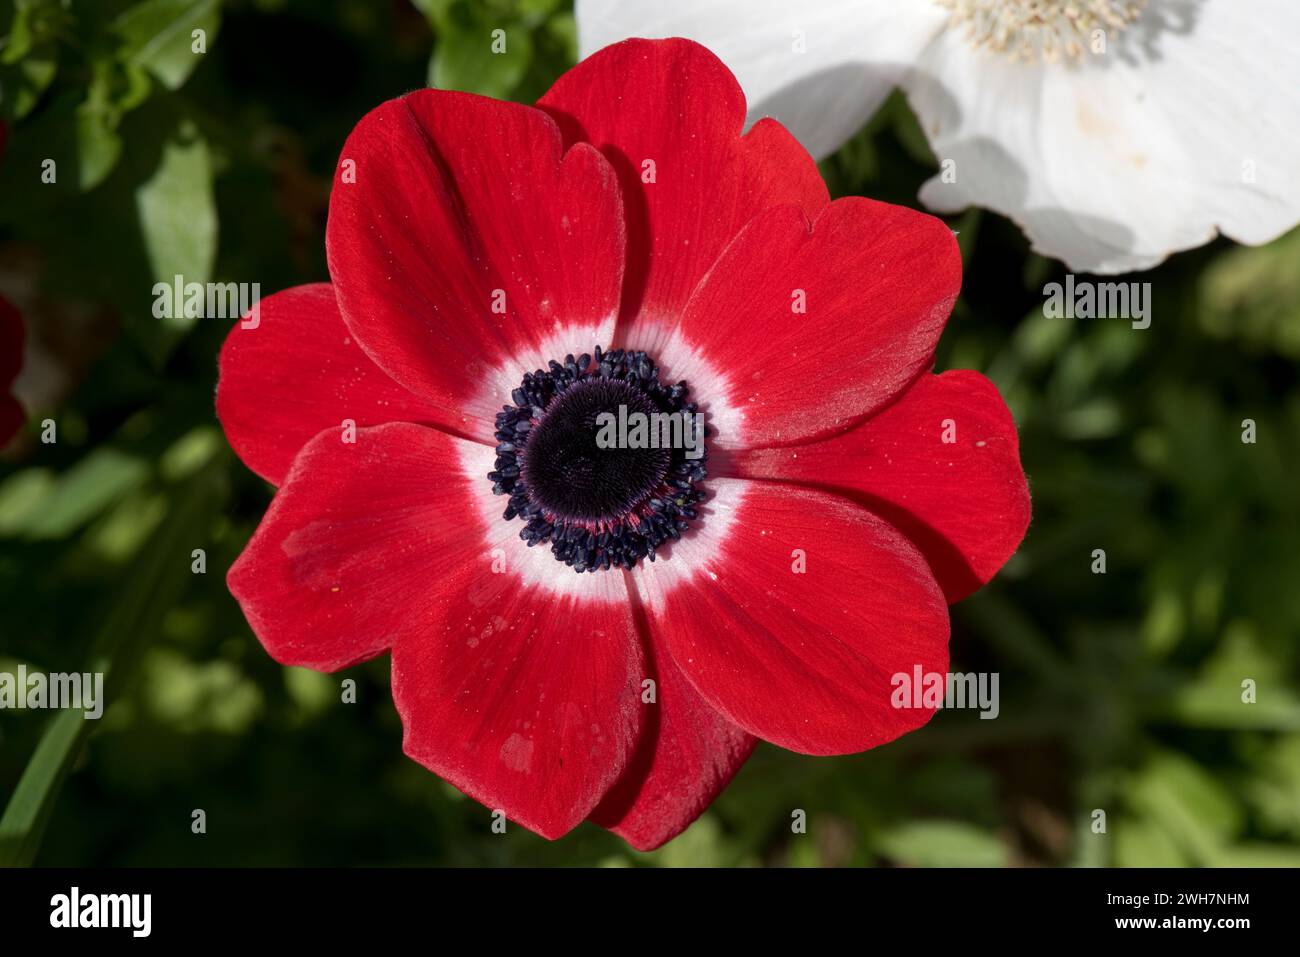 Poppy anemone (Anemone coronaria) red and white flower of perennial tuberous garden ornamental with petal-like tepals and a black centre, Berkshire, A Stock Photo